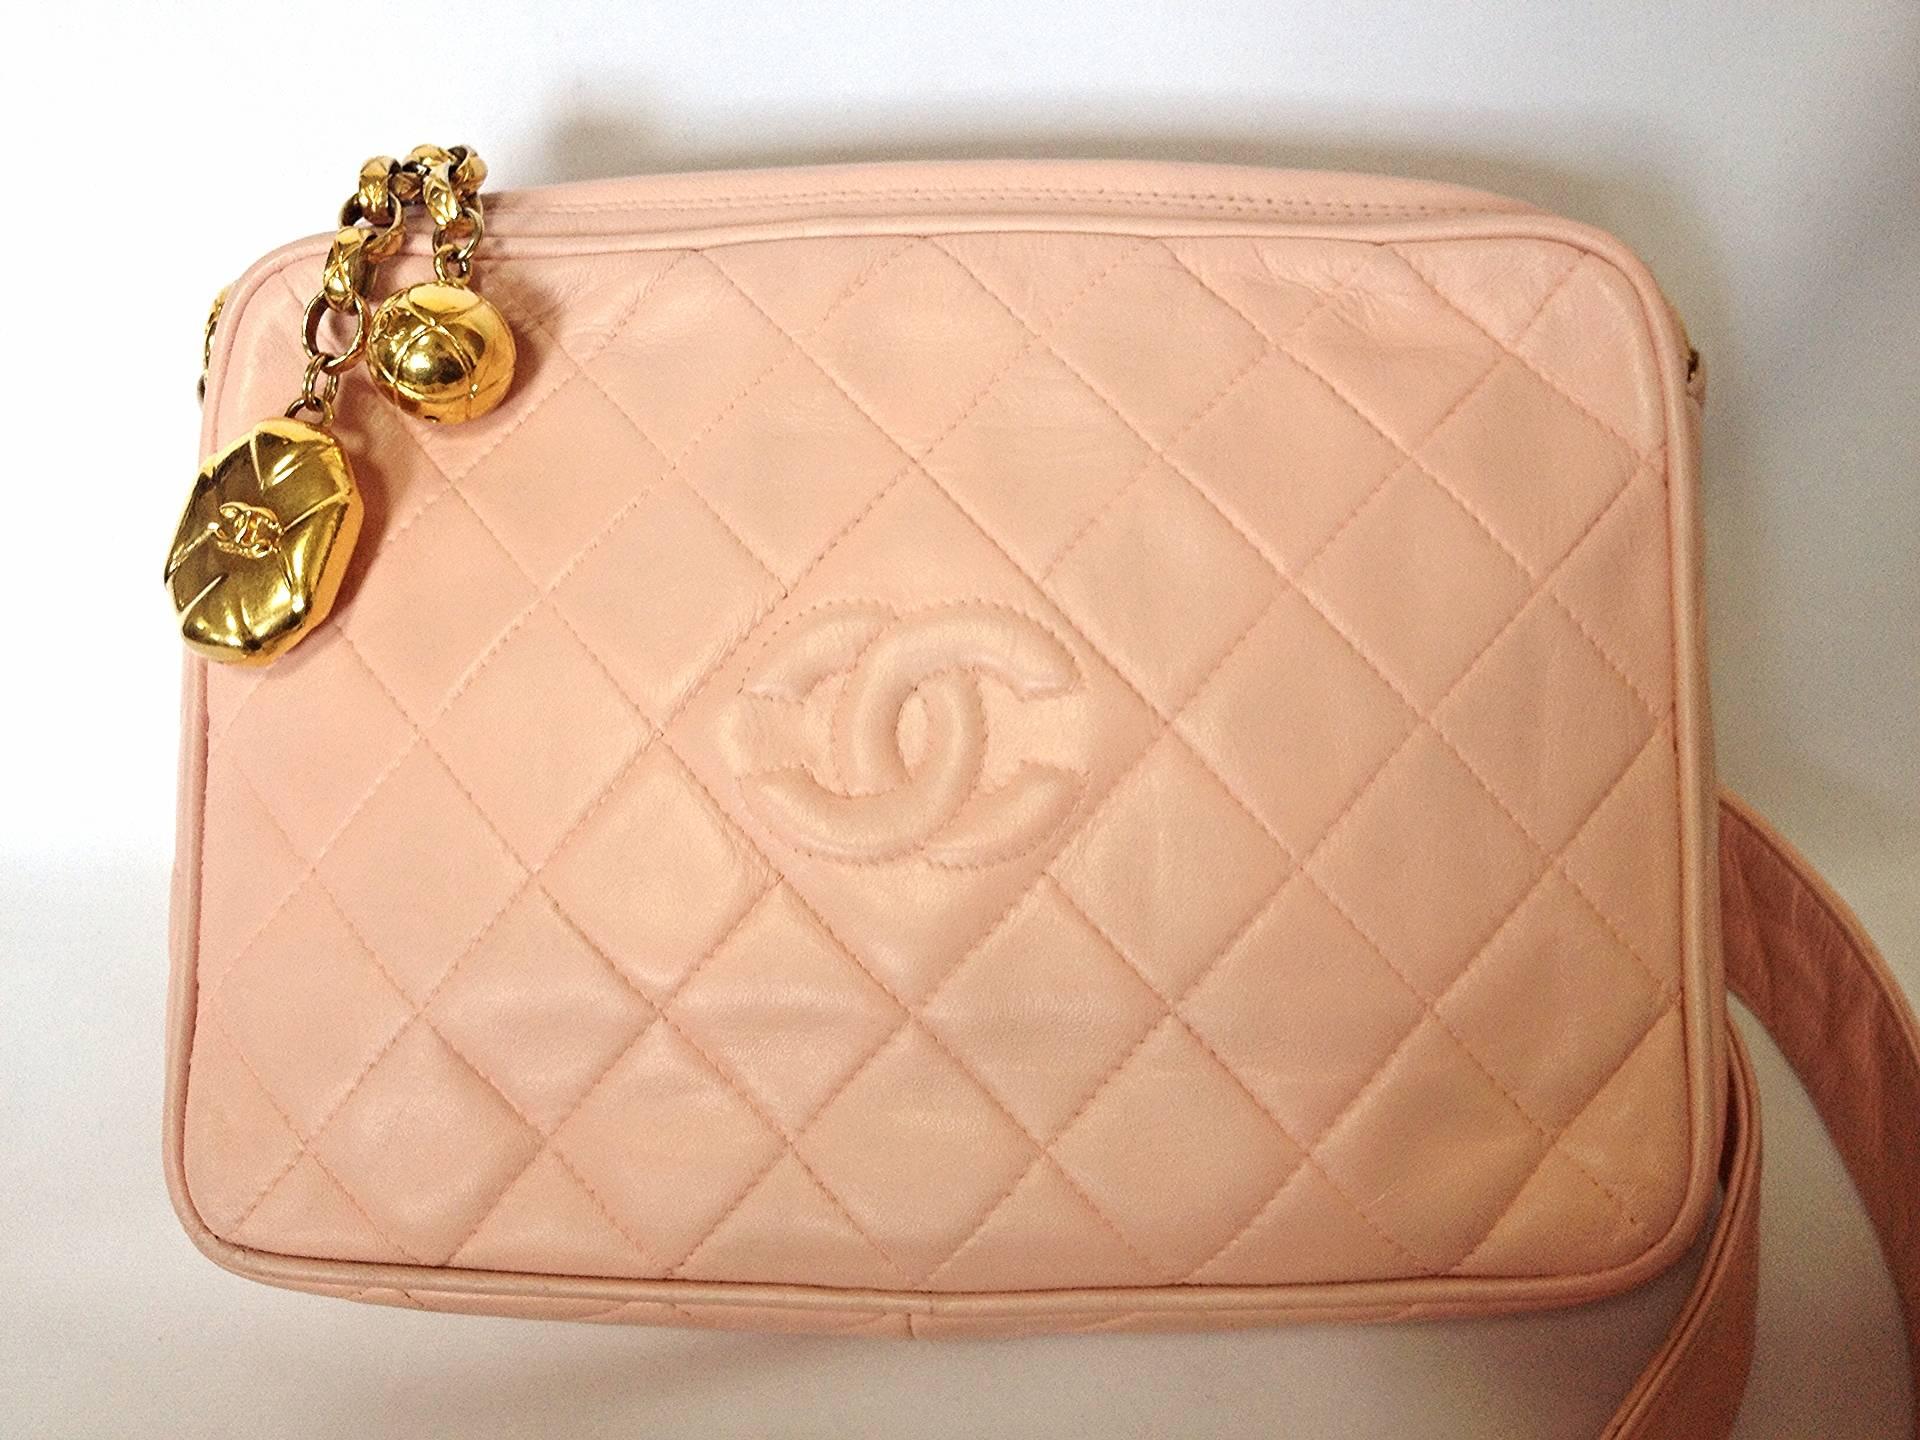 Introducing one of the cutest pieces from CHANEL, milky pink color lambskin medium size shoulder bag with dangling logo charms. Rare color and style. Will definitely be one of your daily use vintage Chanel bags for sure.

Featuring 2 golden CC